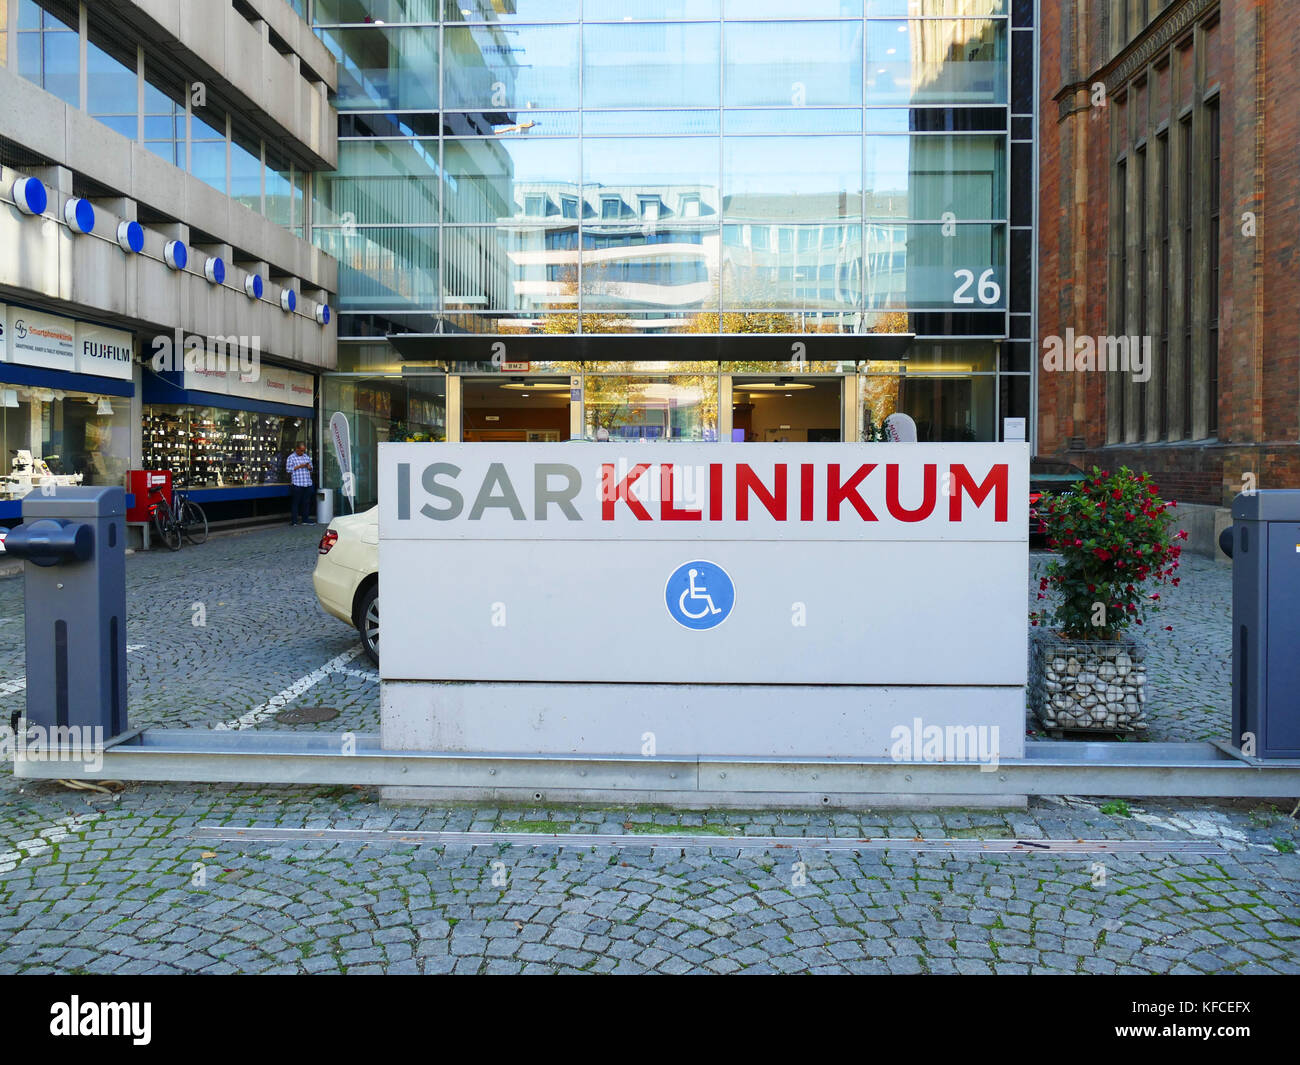 Isar Klinikum private Clinic in Munich city Germany Europe. Quite a lot of foreign patients from Asian Arabic country come here for medical treatment  Stock Photo